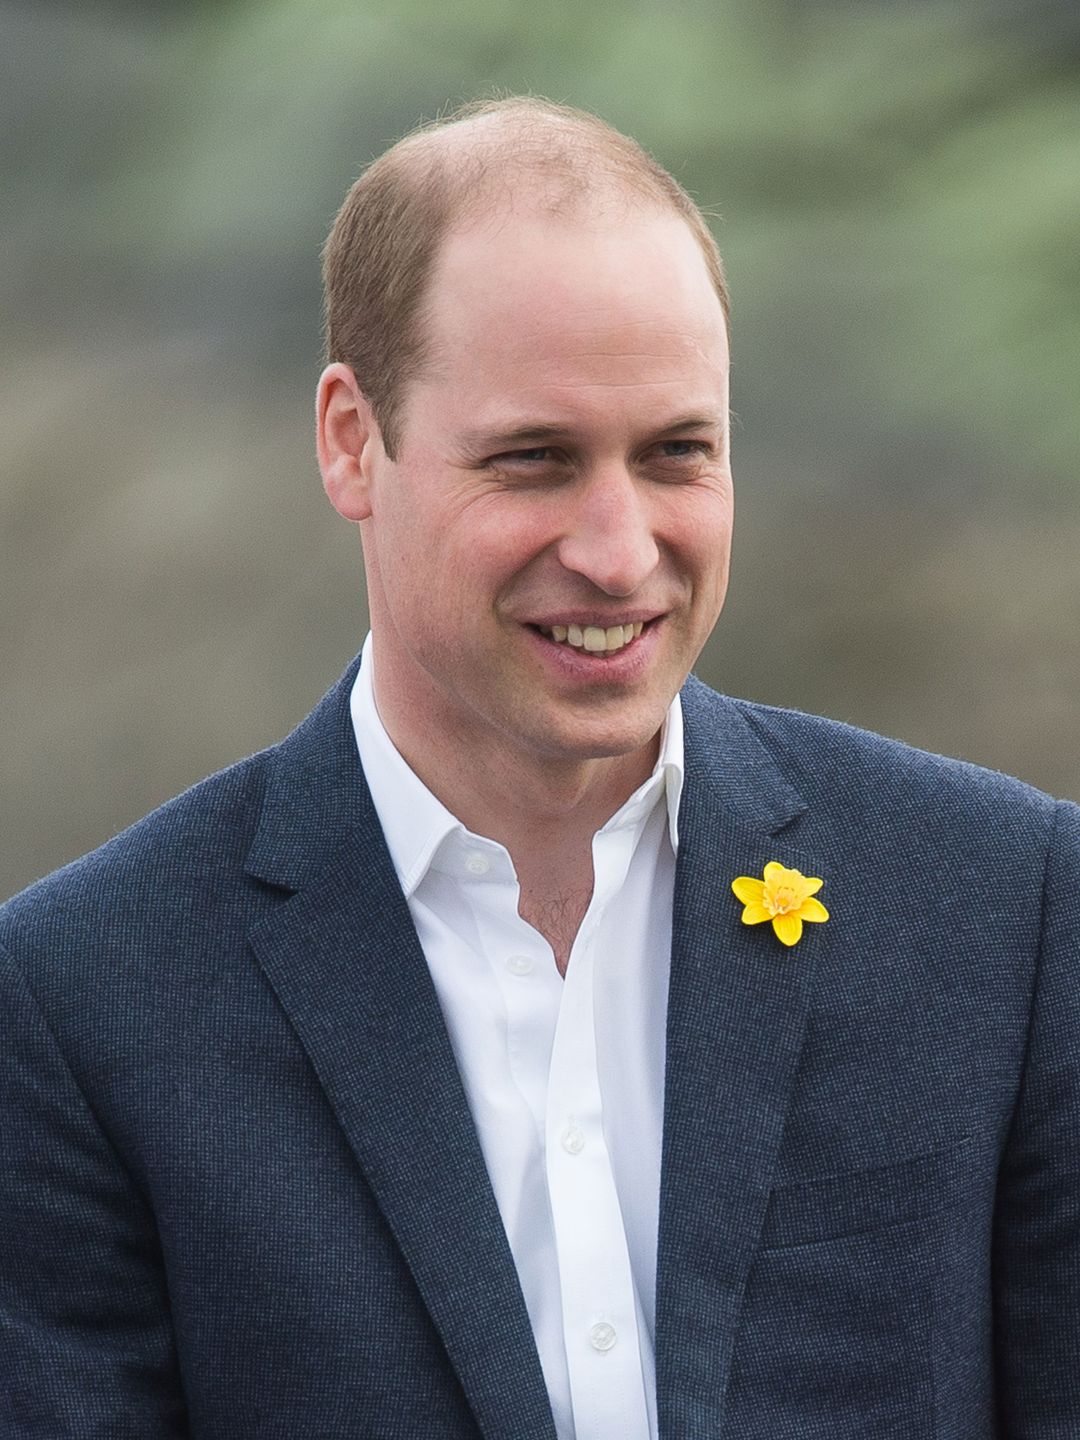 Prince William young pics